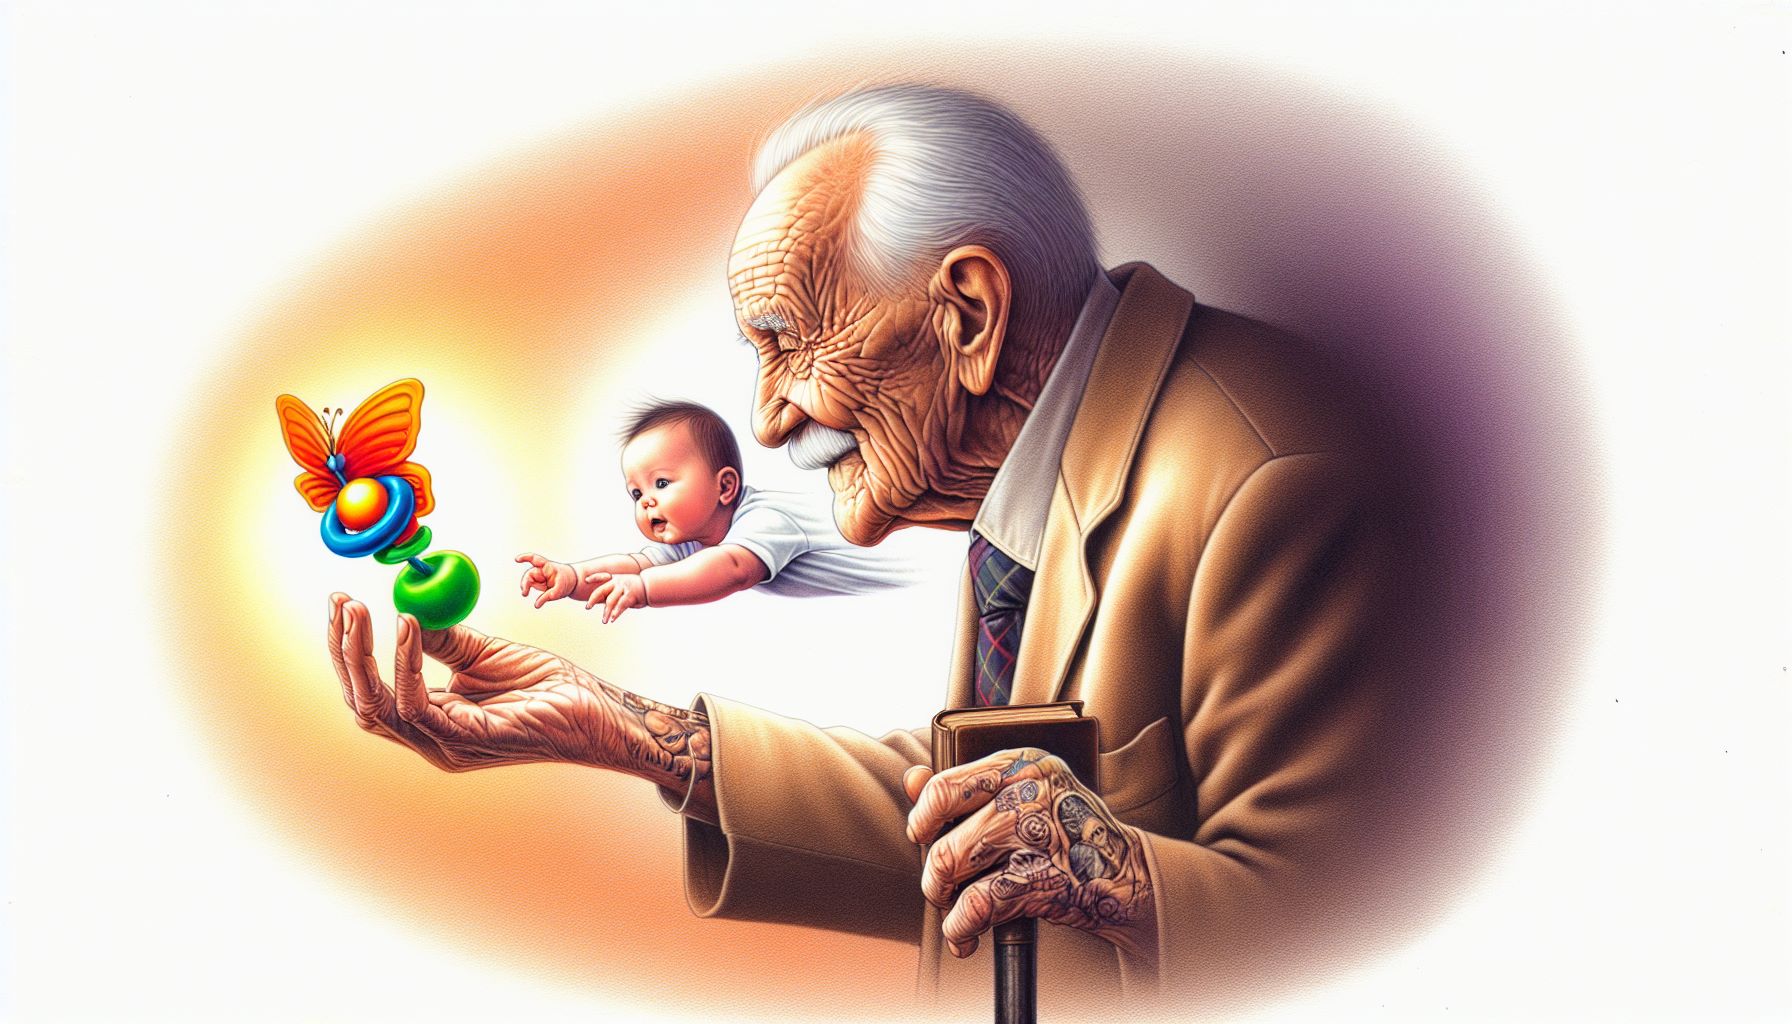 Illustration of a baby and an elderly person